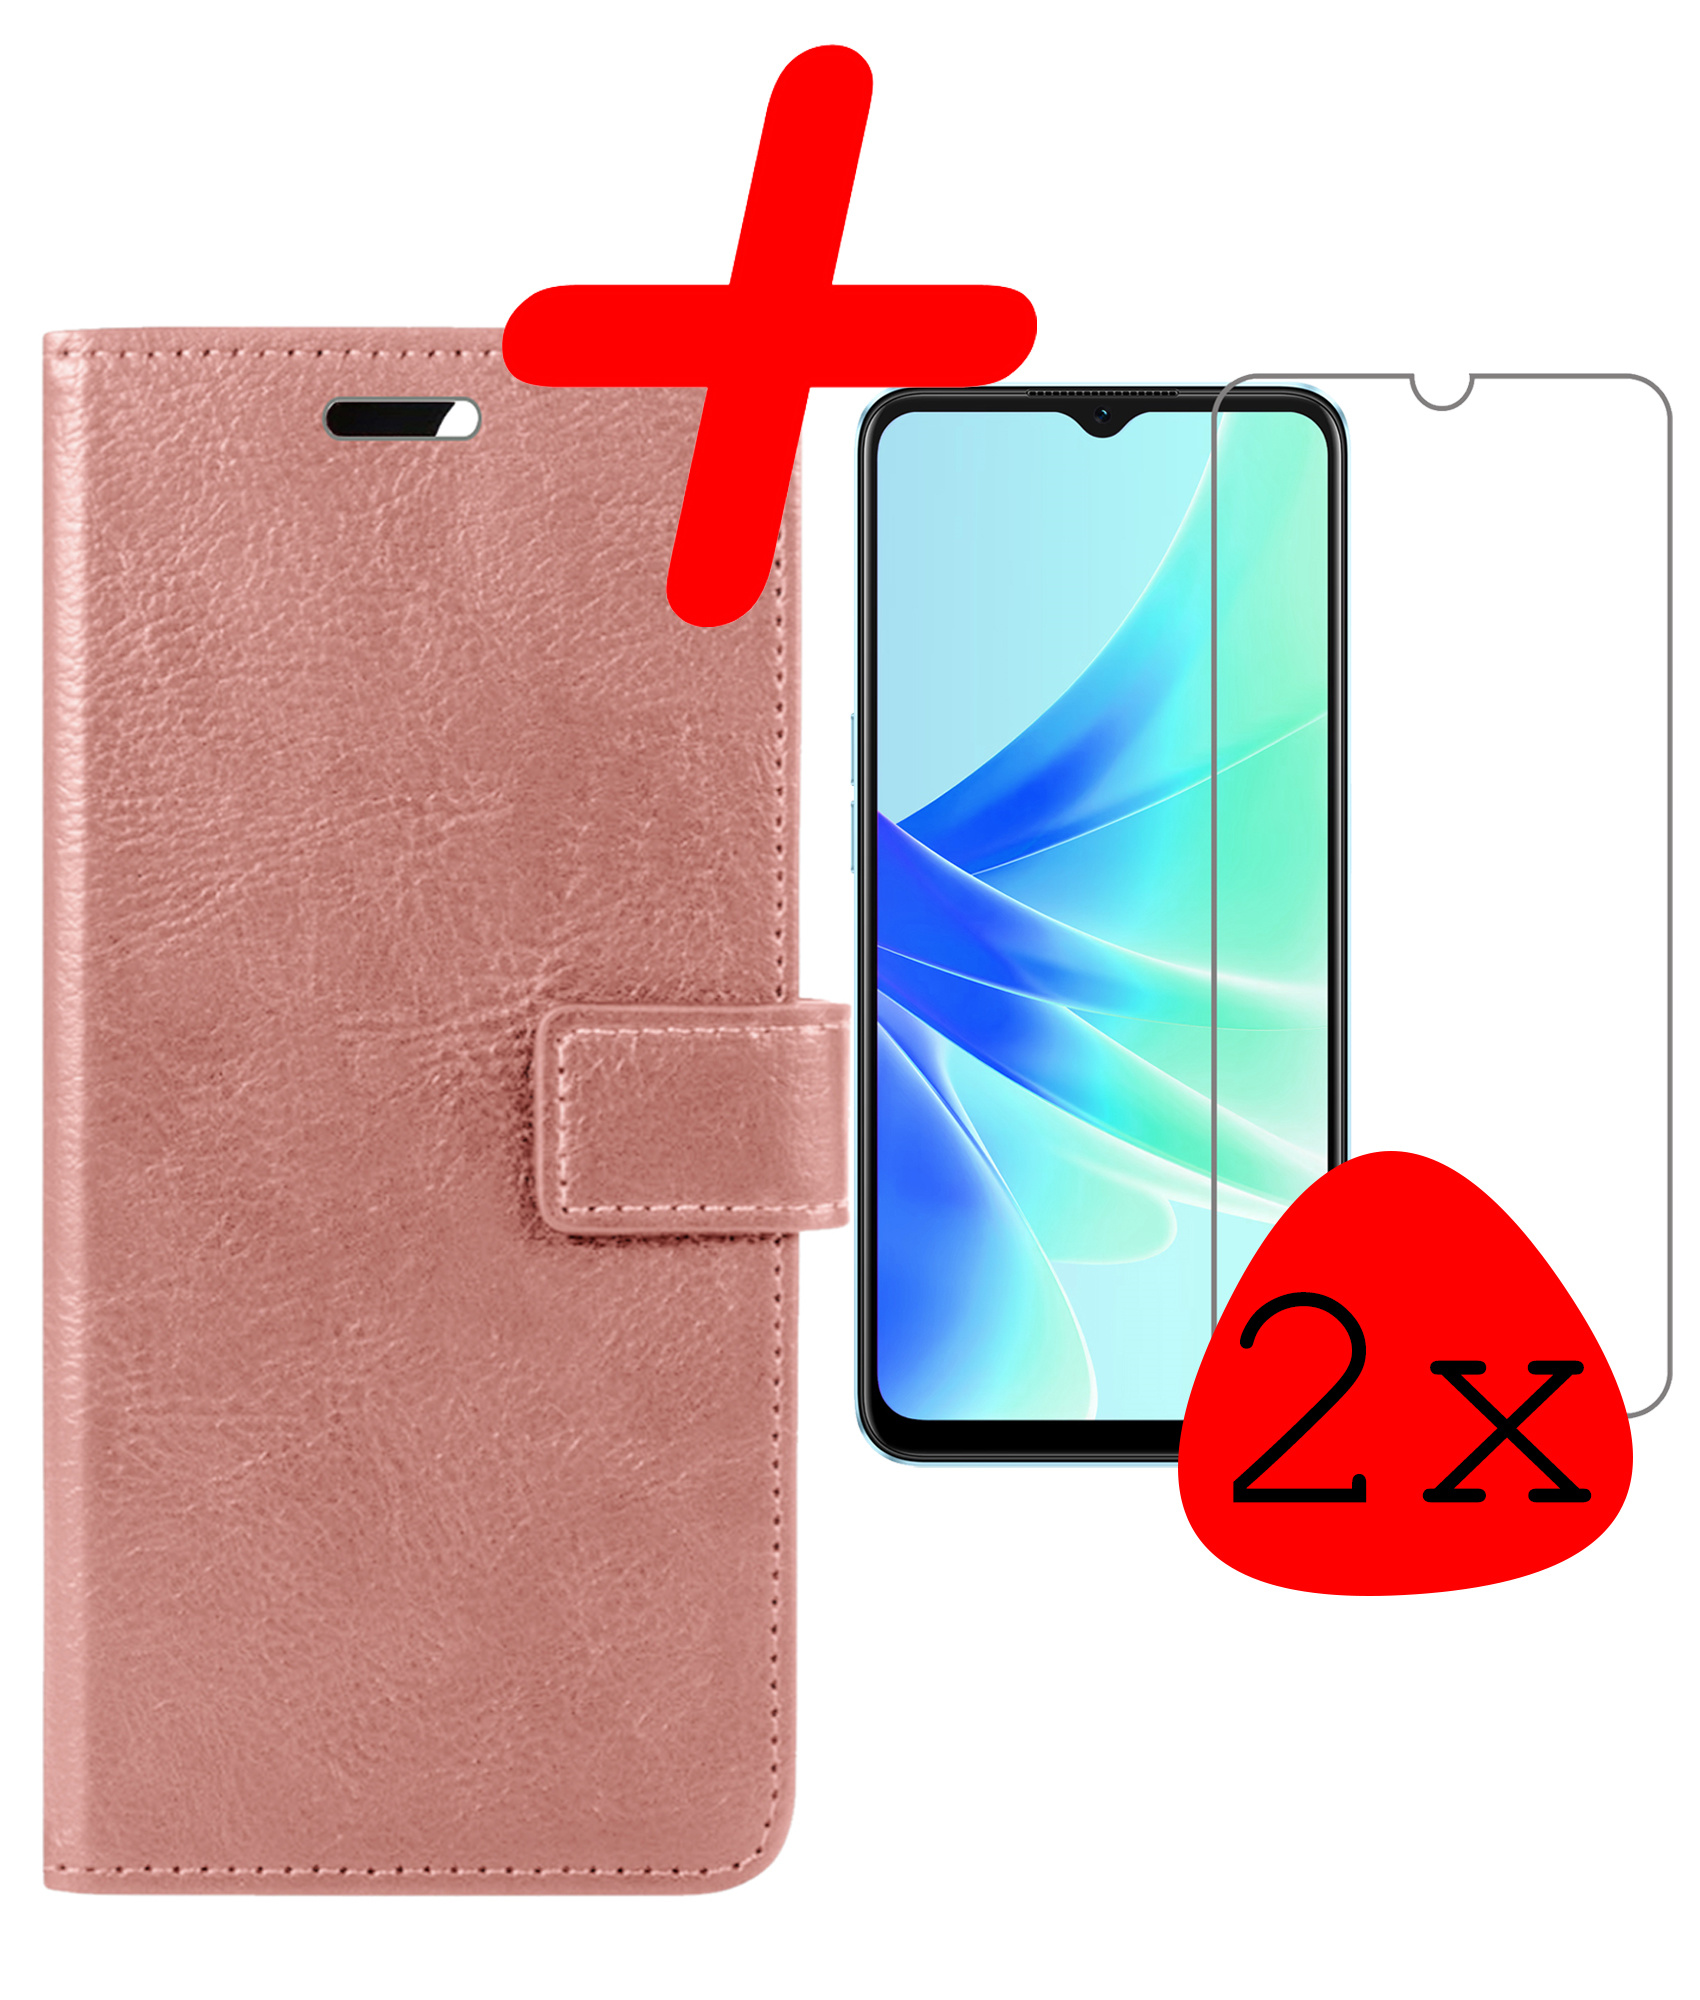 OPPO A17 Hoesje Bookcase Hoes Flip Case Book Cover 2x Met Screenprotector - OPPO A17 Hoes Book Case Hoesje - Rose Goud